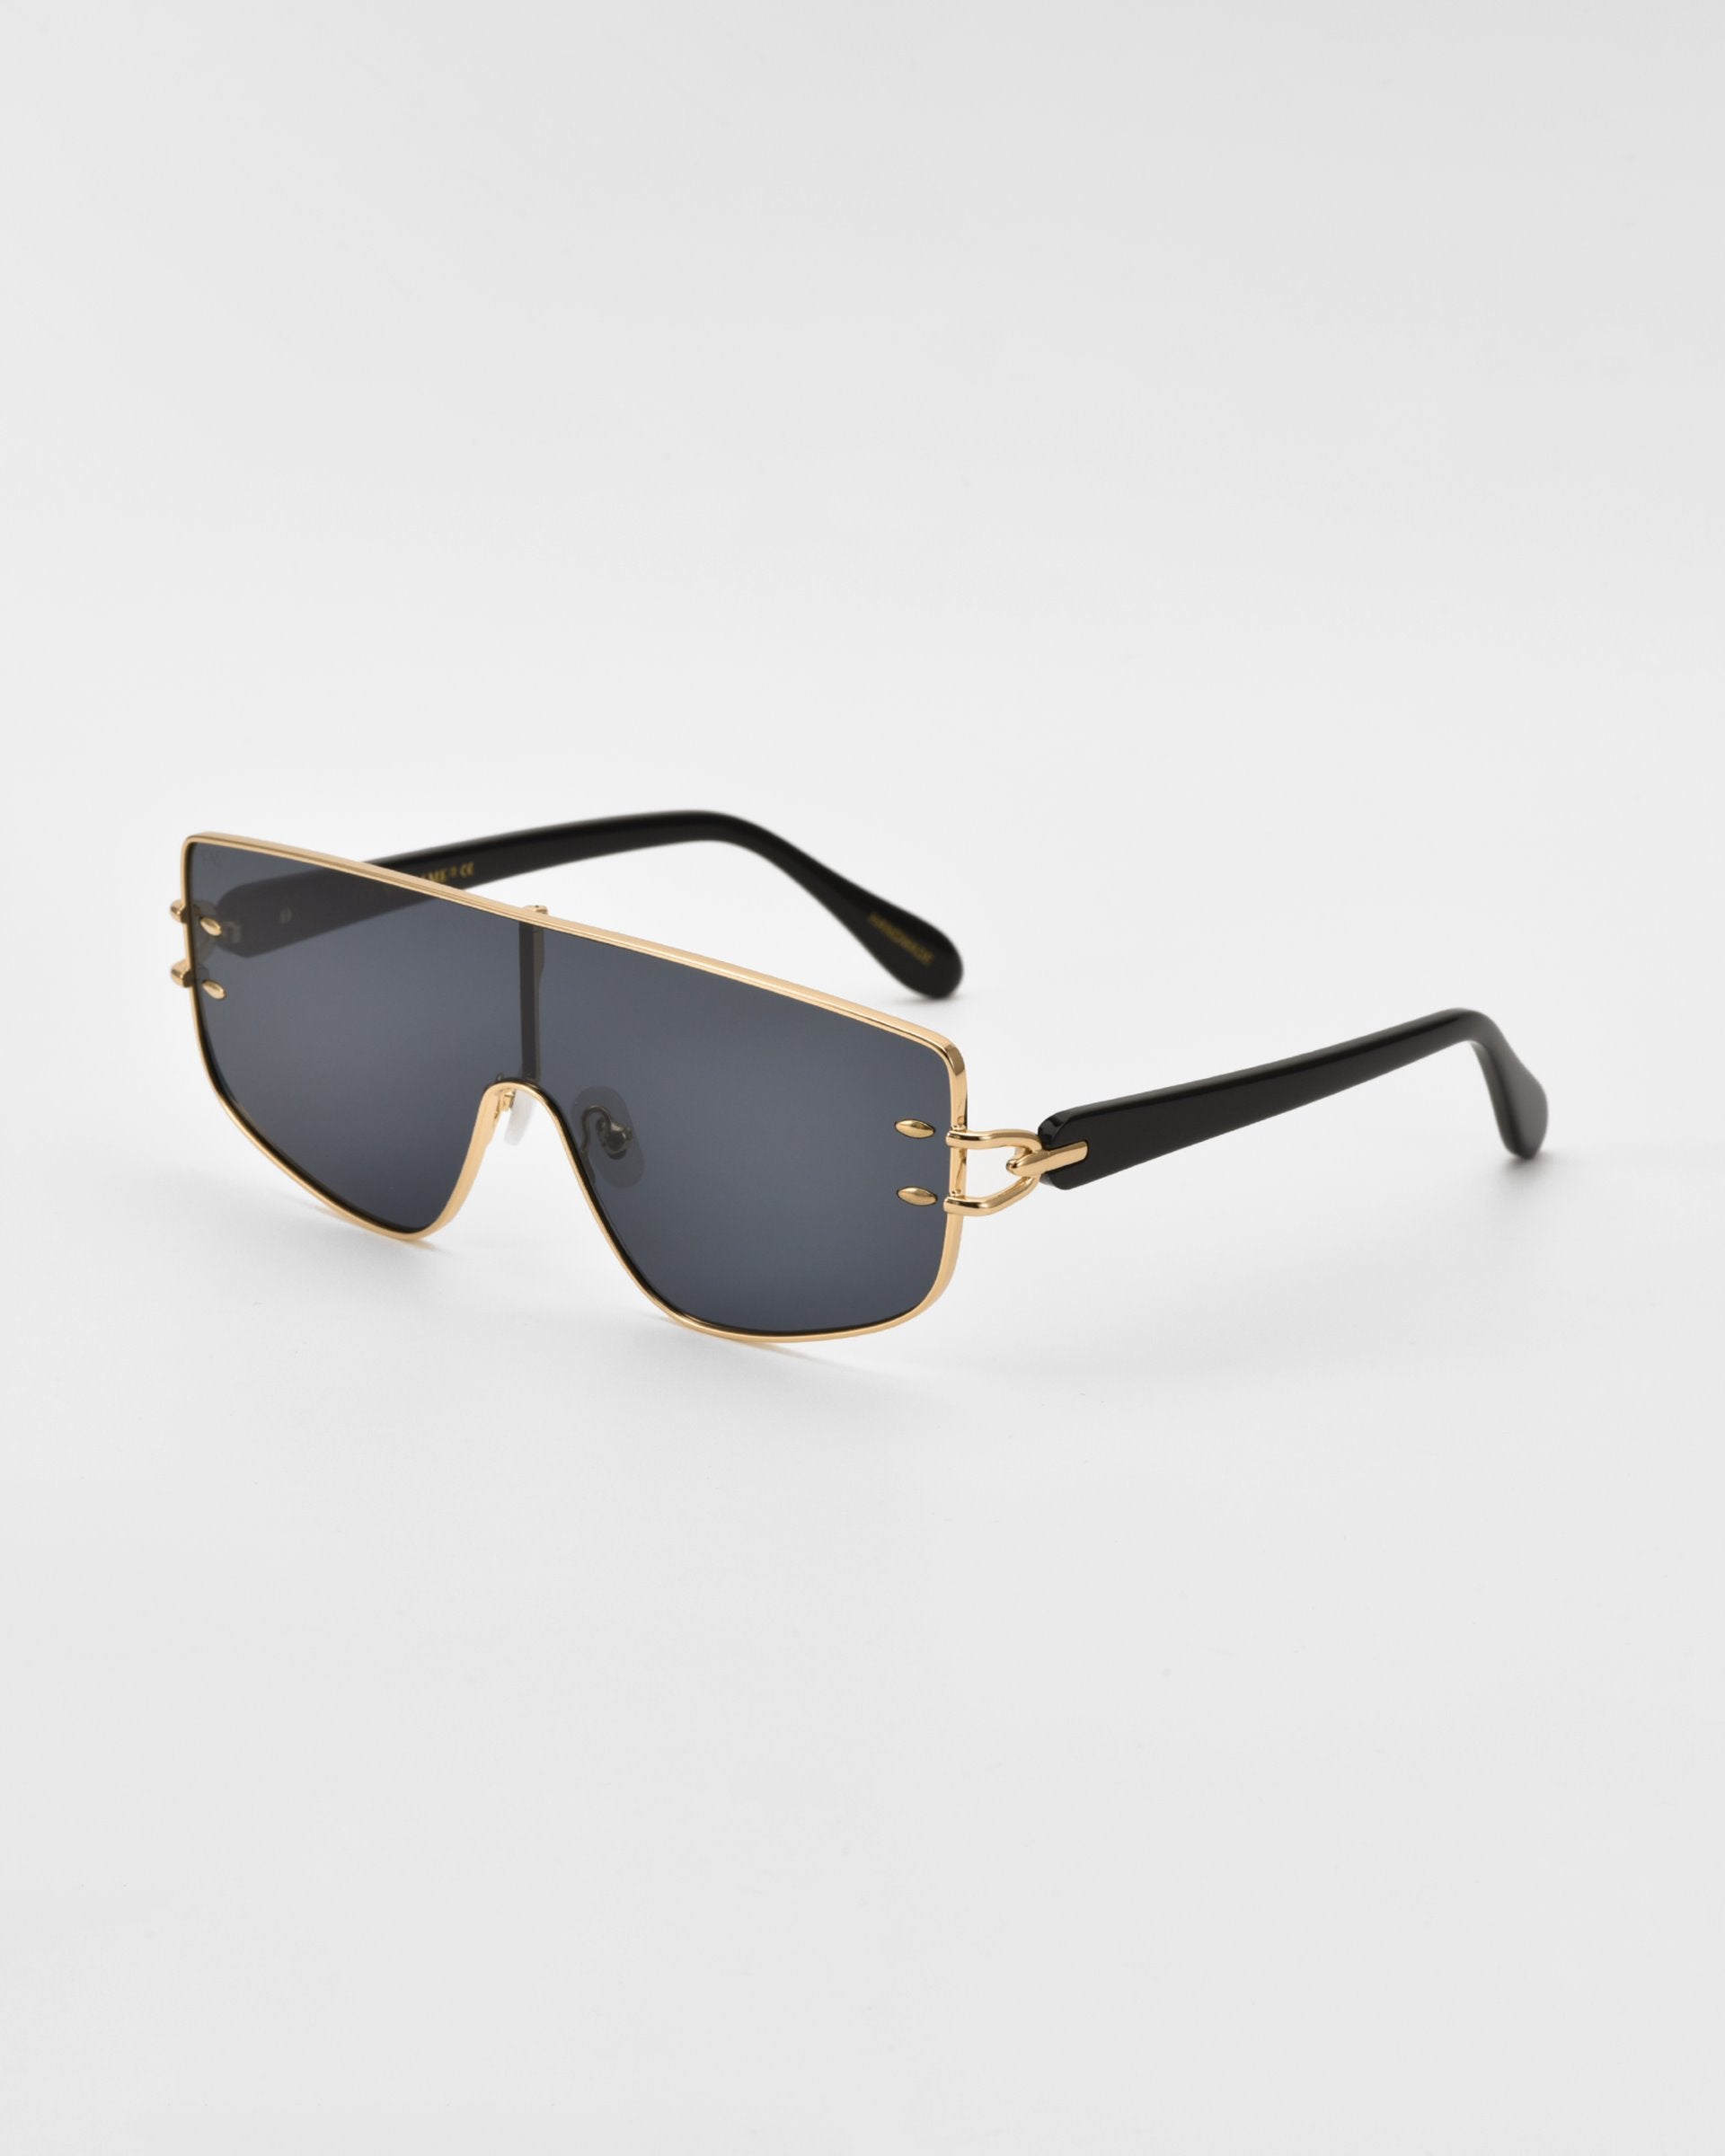 For Art&#39;s Sake® Flare sunglasses with a black frame and gold accents, featuring large, dark lenses offer a touch of luxury eyewear. The arms are black with a noticeable gold hinge detail near the lenses, all set against a plain white background.